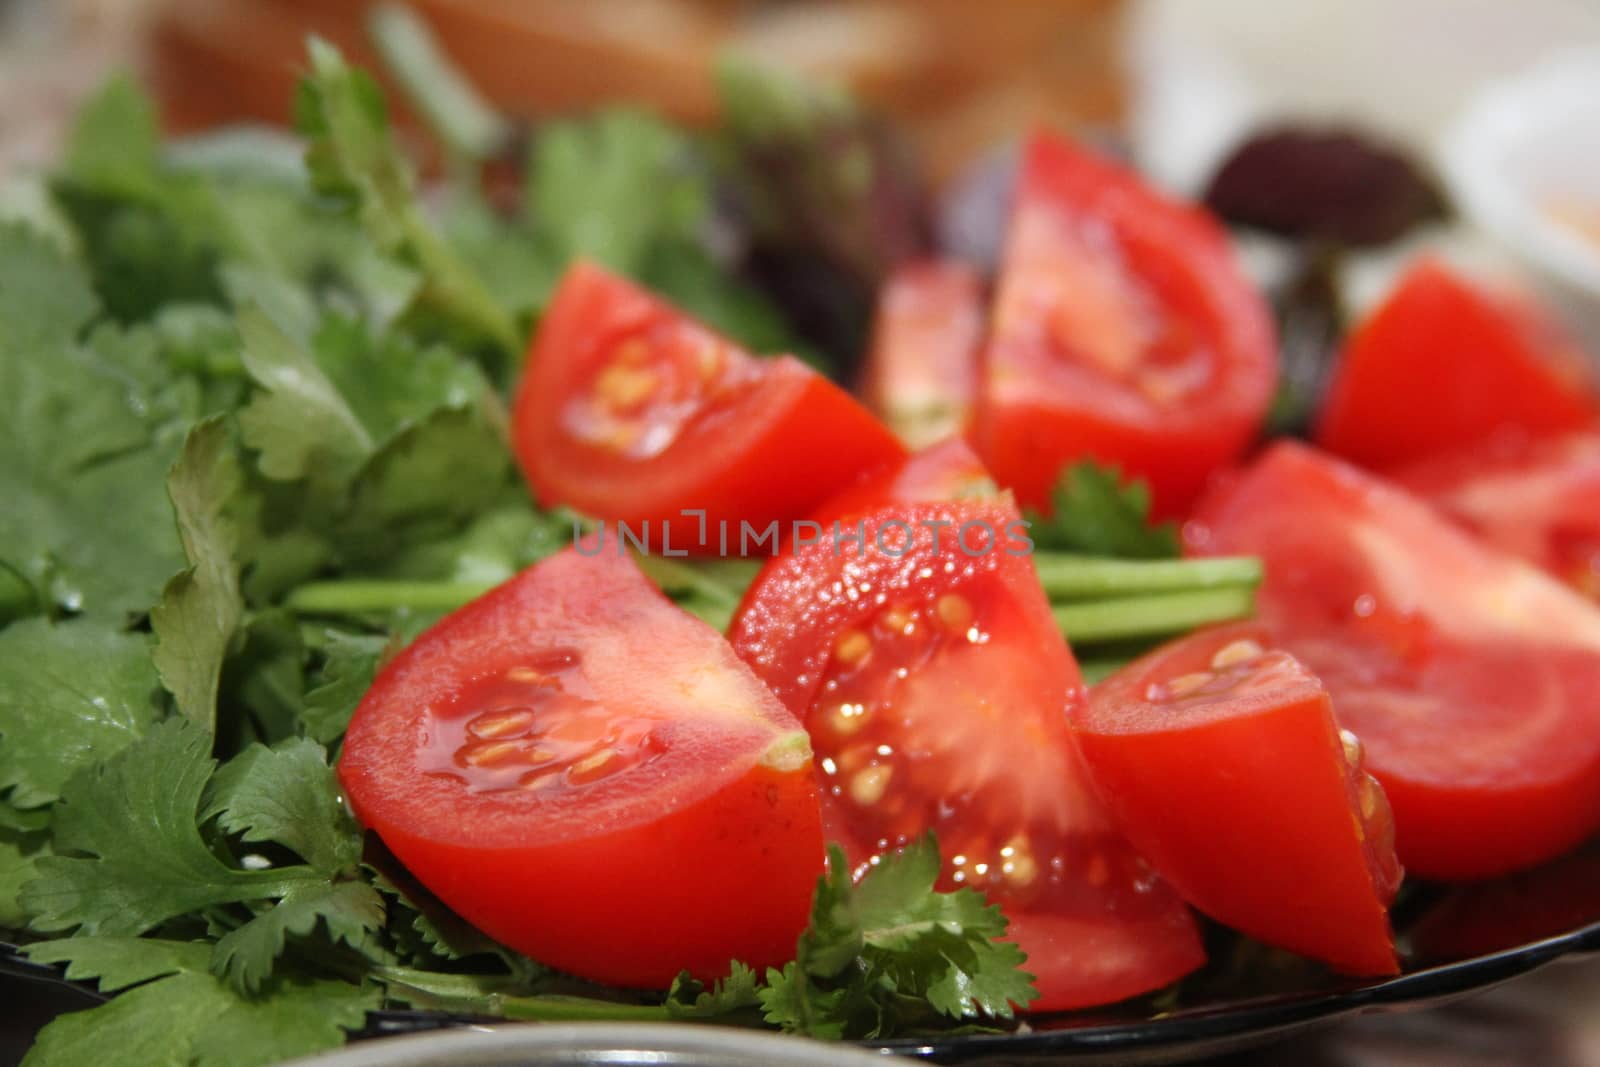 Bright juicy red tomatoes and cilantro leaves, parsley by mcherevan